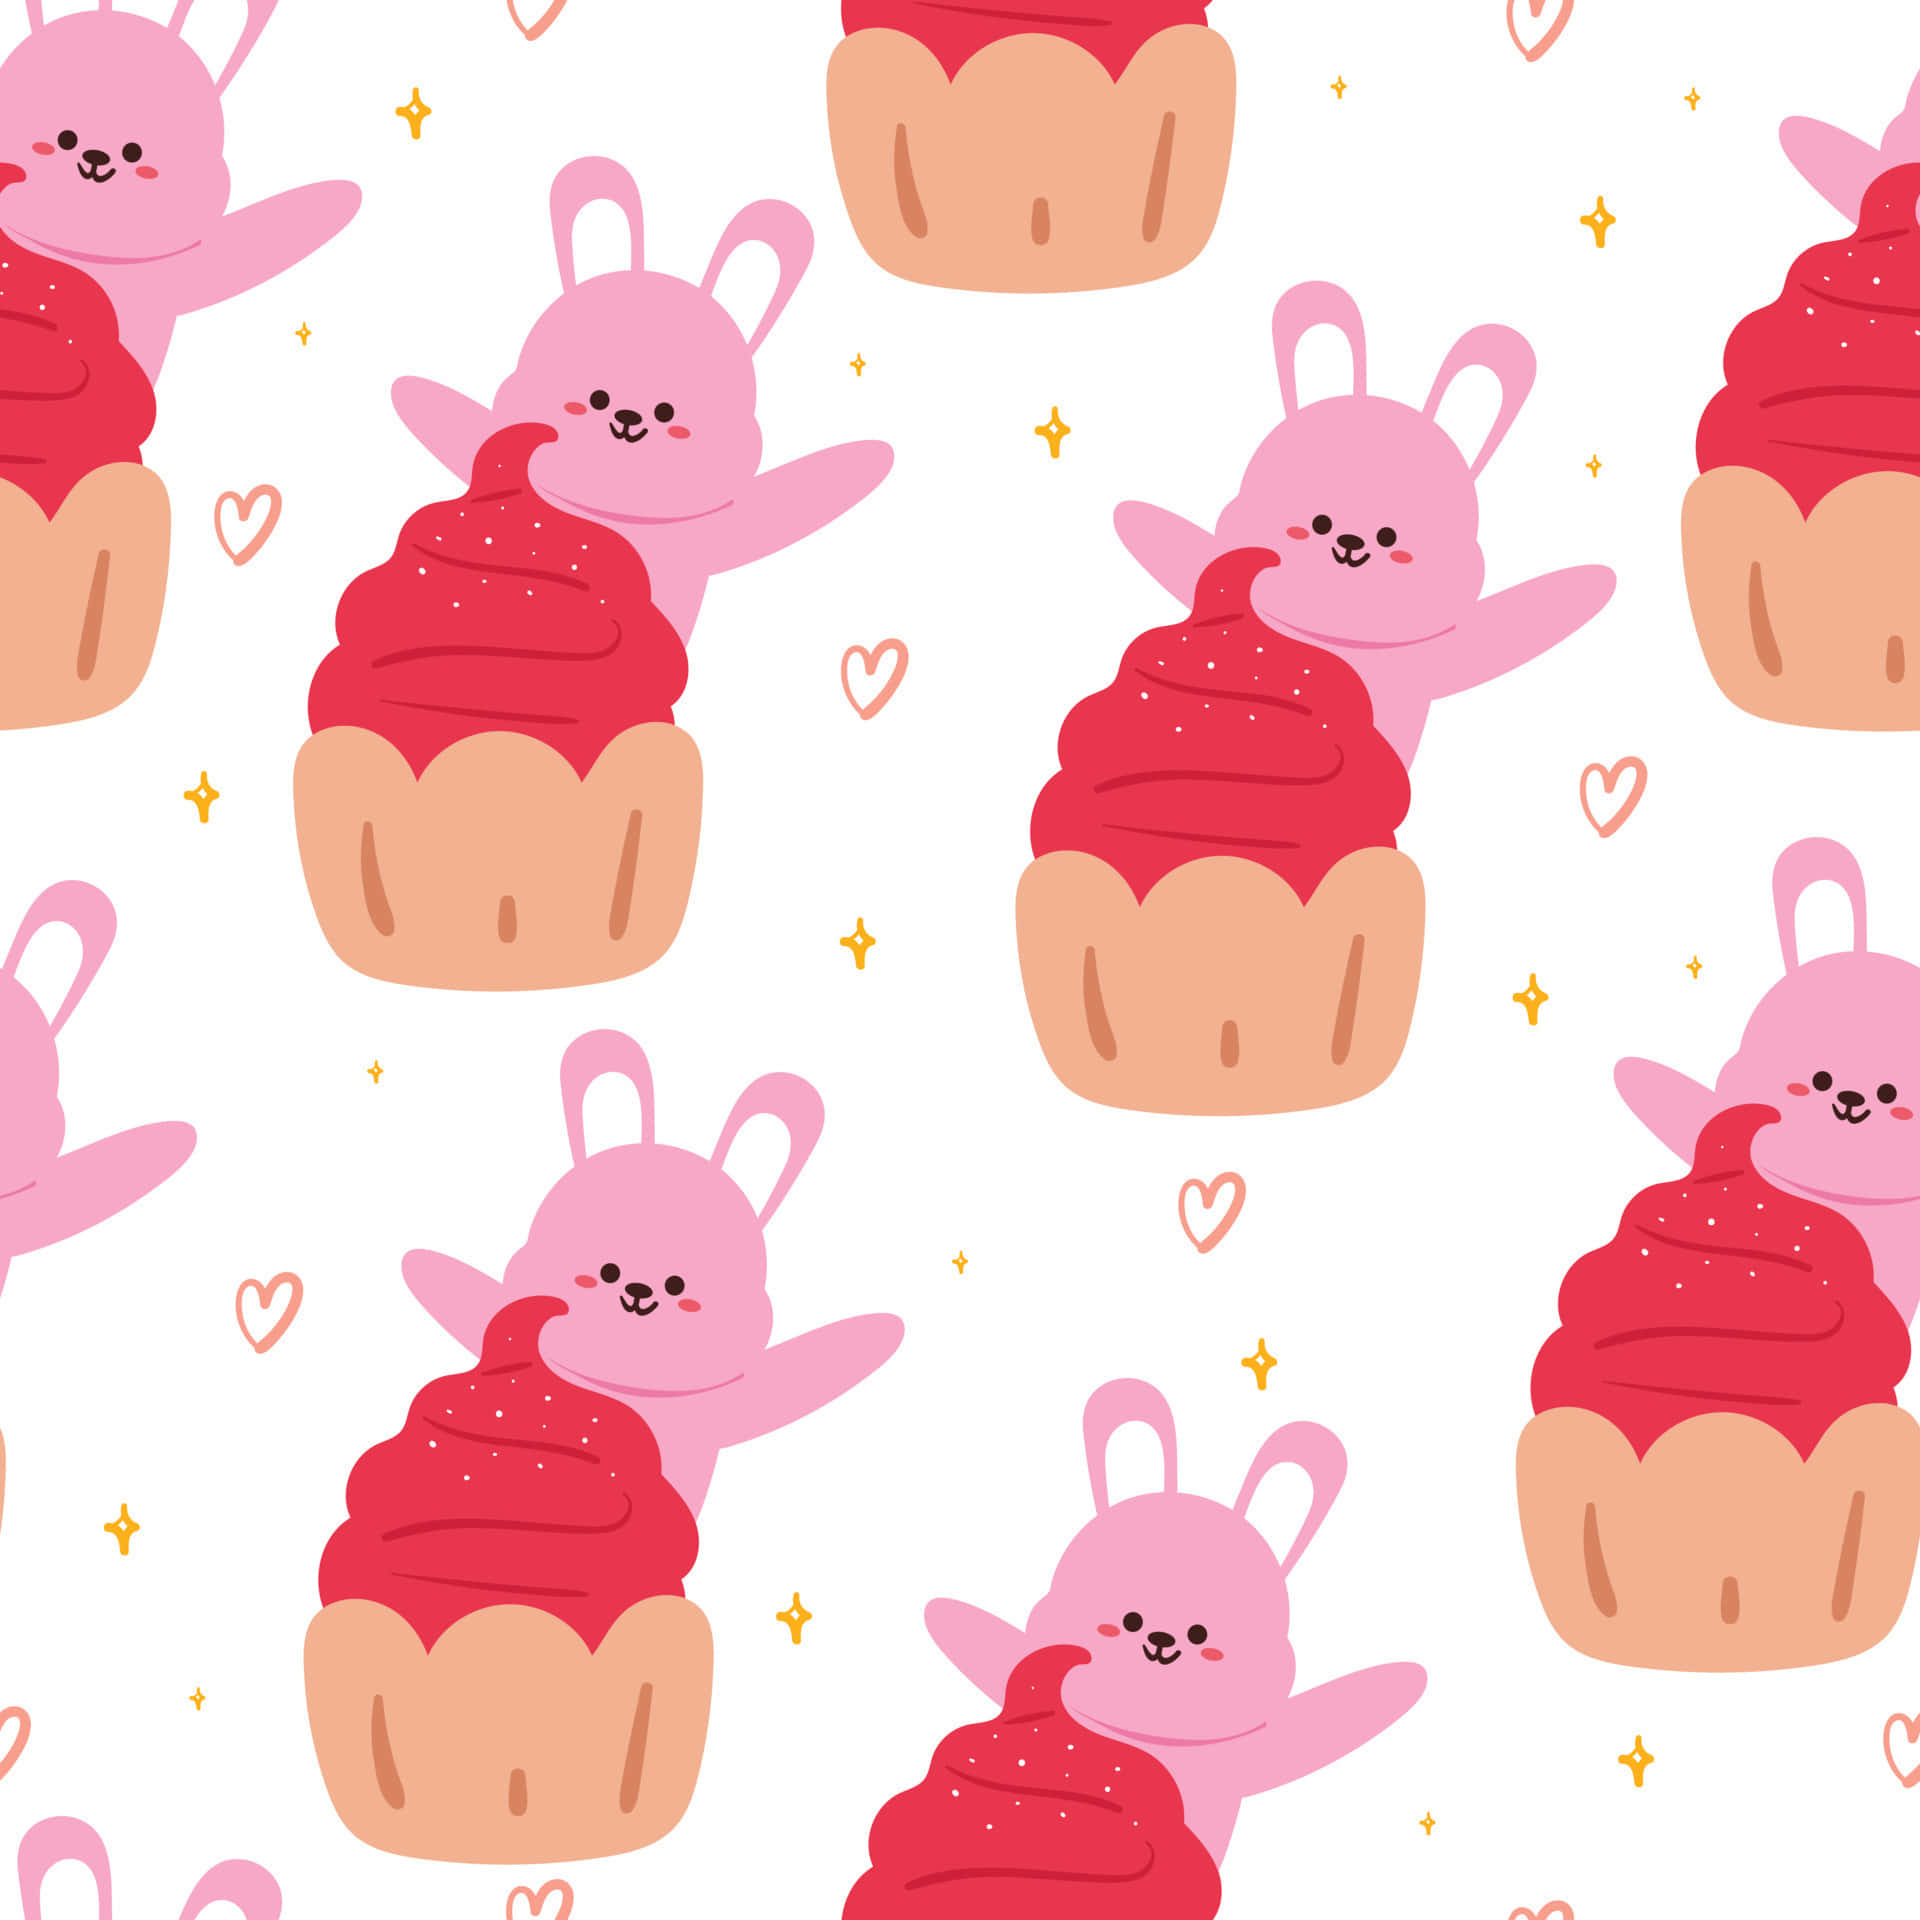 Cute Cupcake with Colorful Sprinkles and Cherry on Top Wallpaper